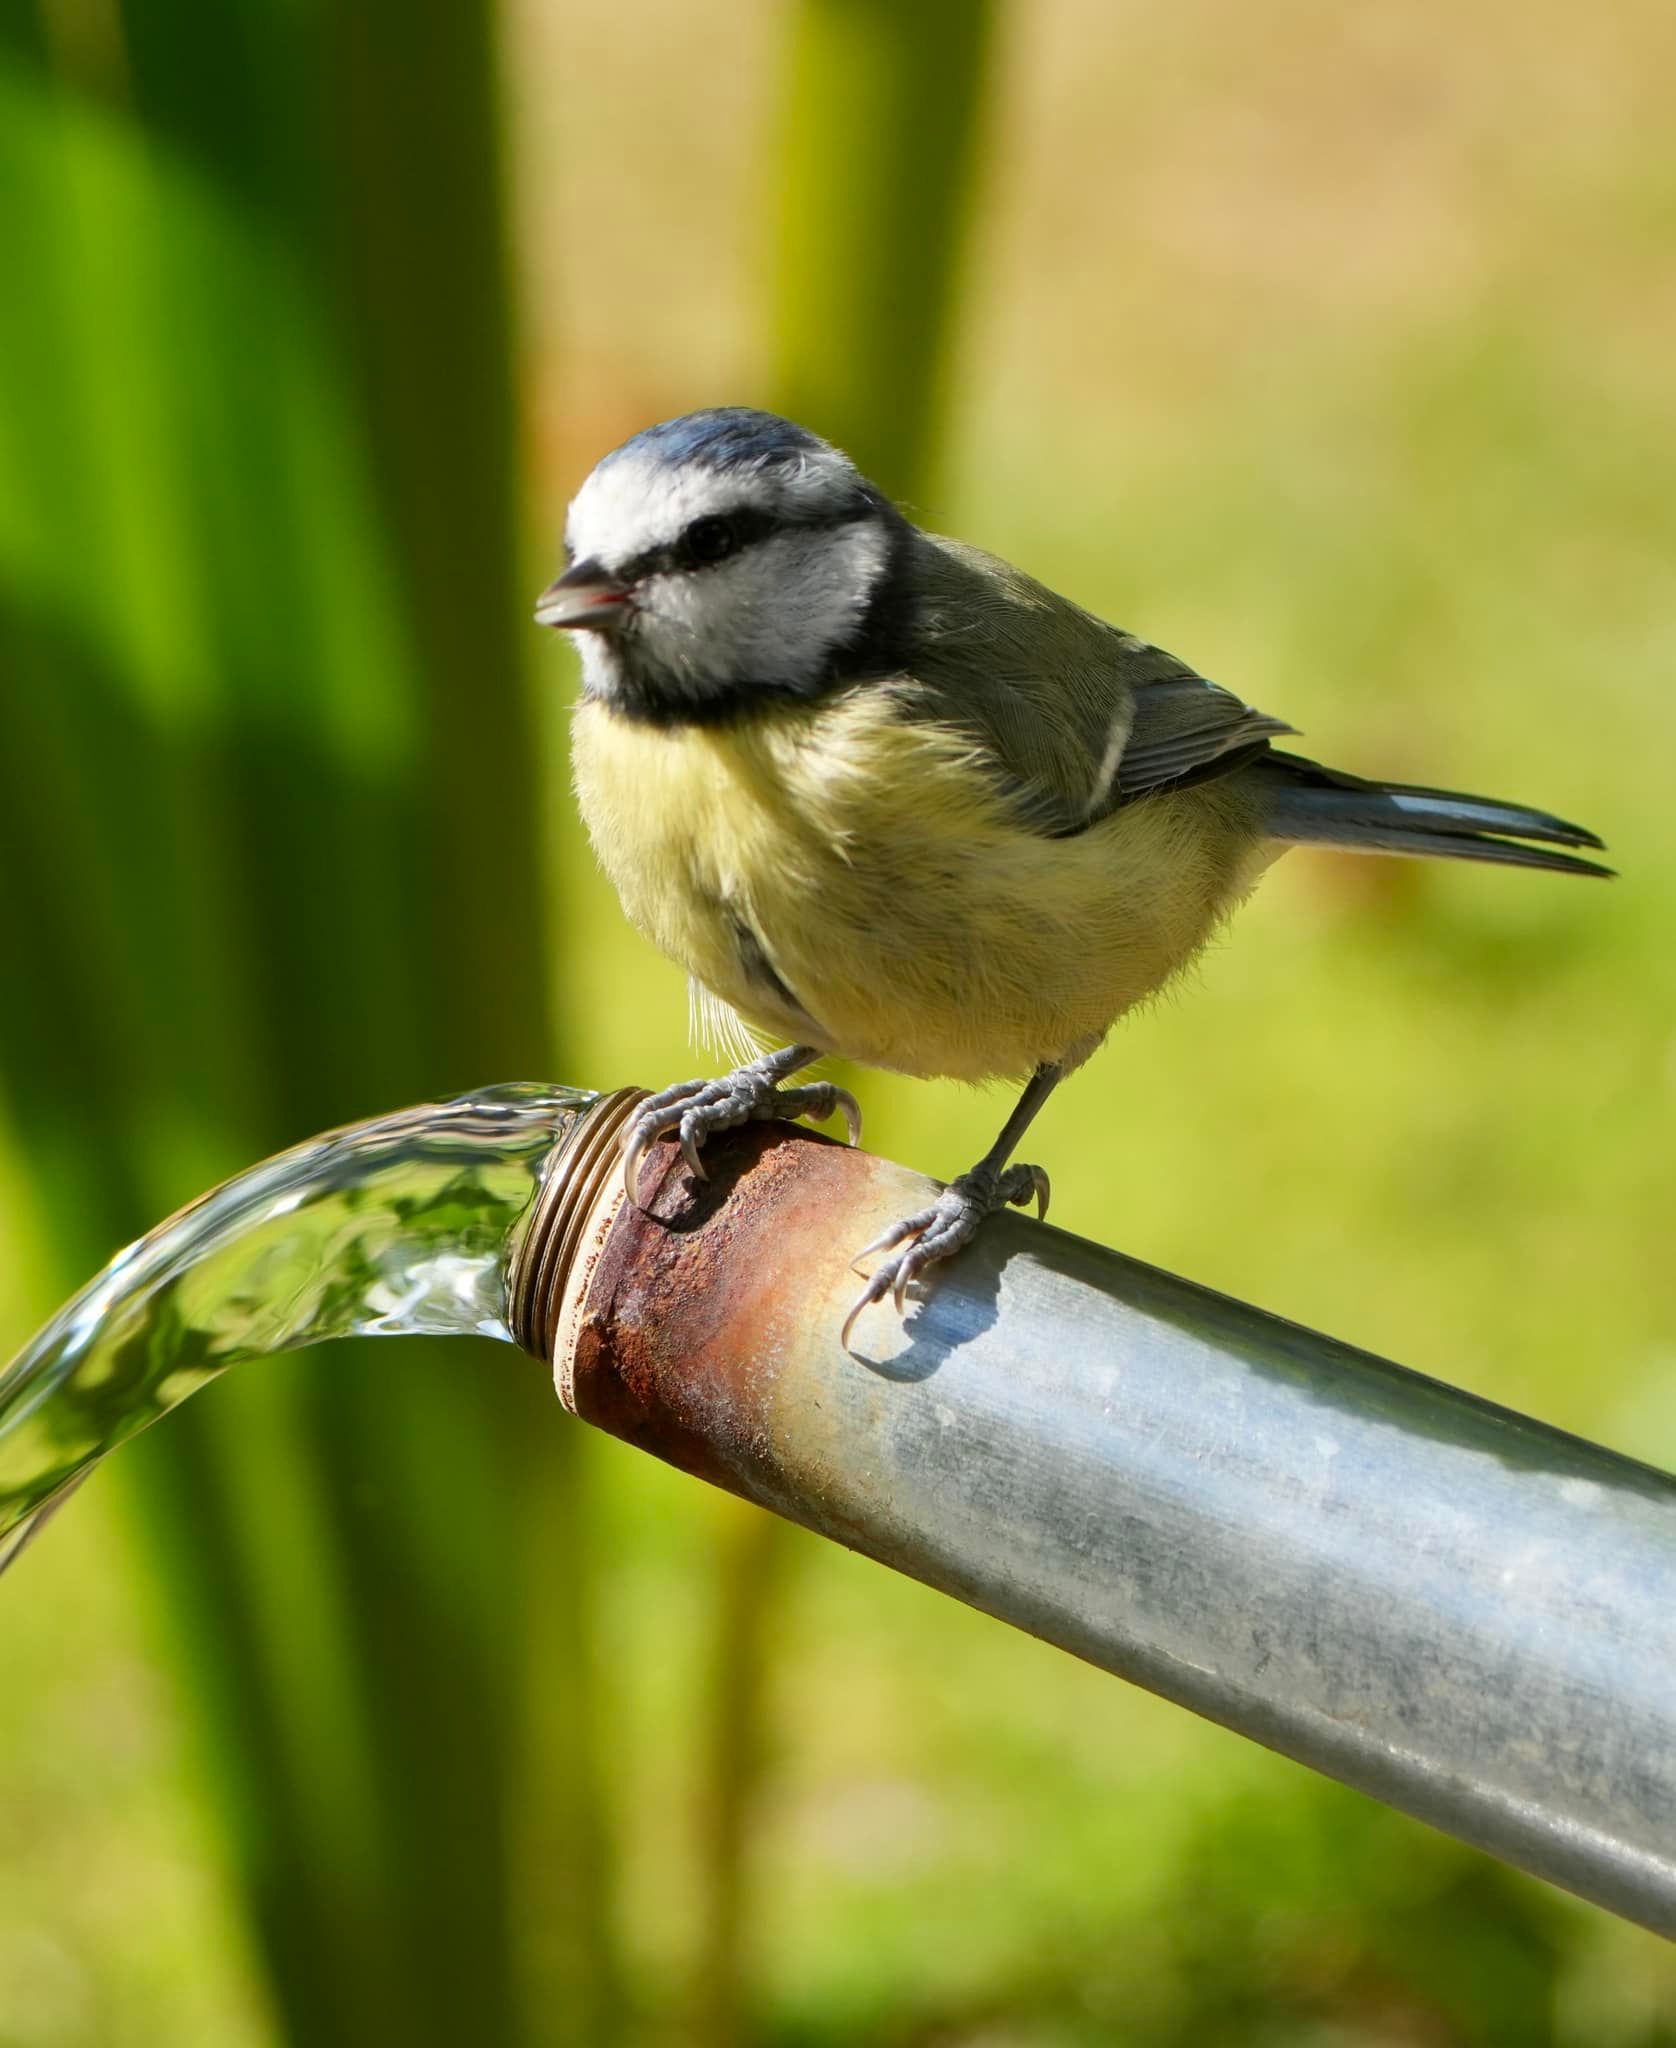 A bluetit enjoying the watering can by Andy Conboy